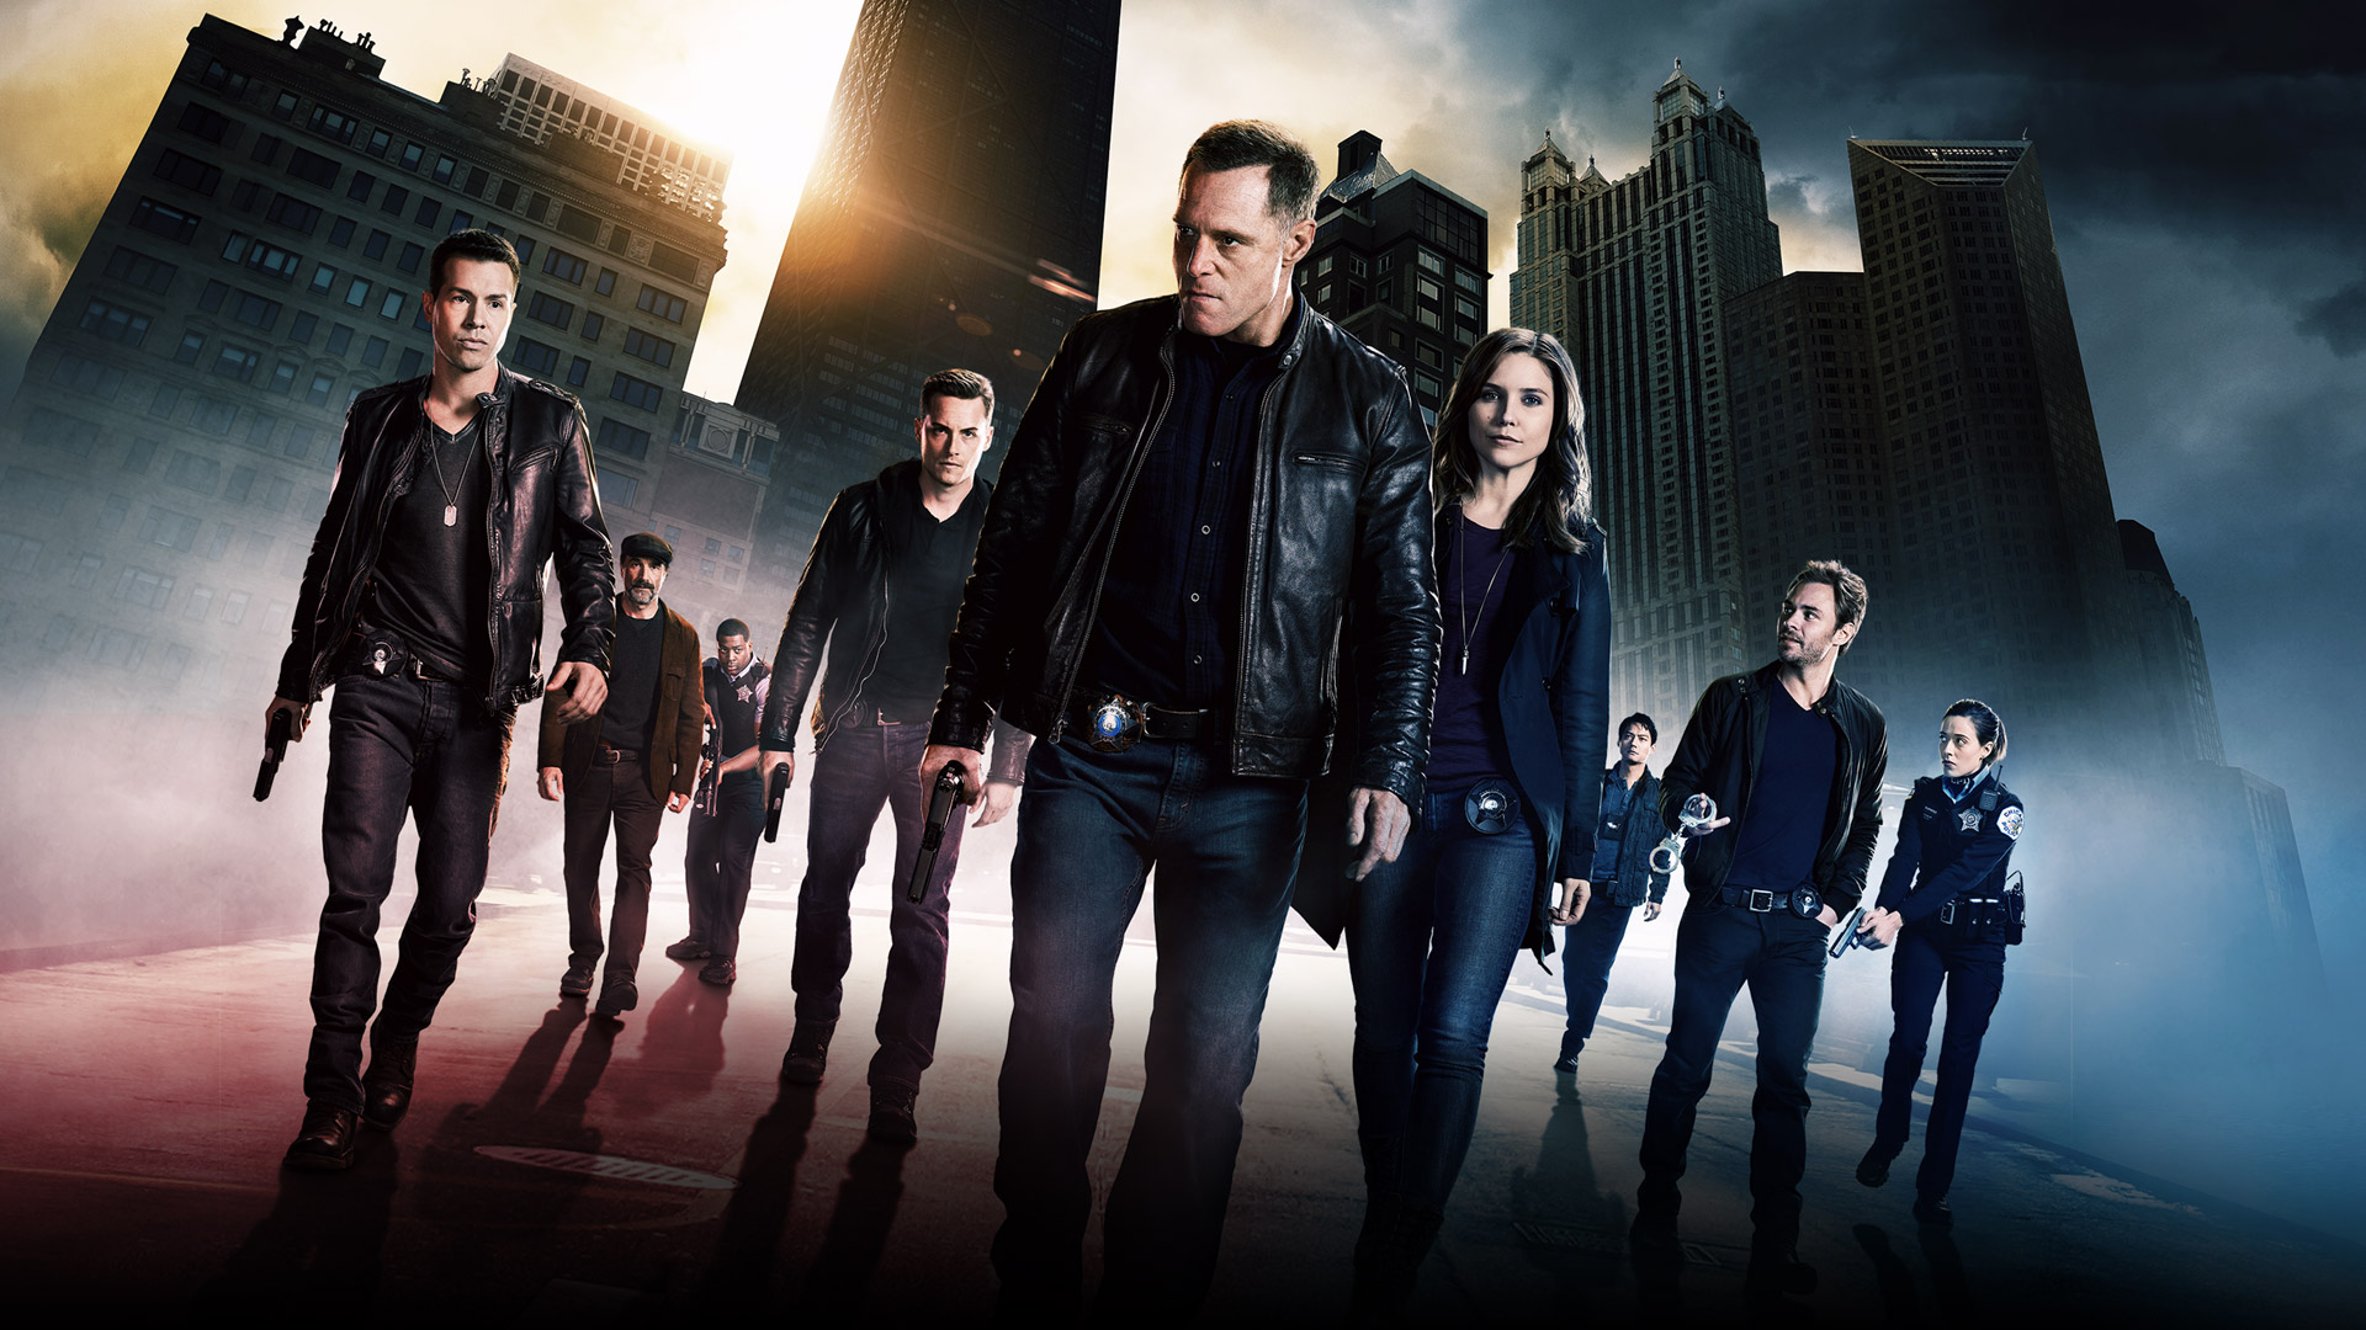 Casting The NBC TV Series Chicago PD!